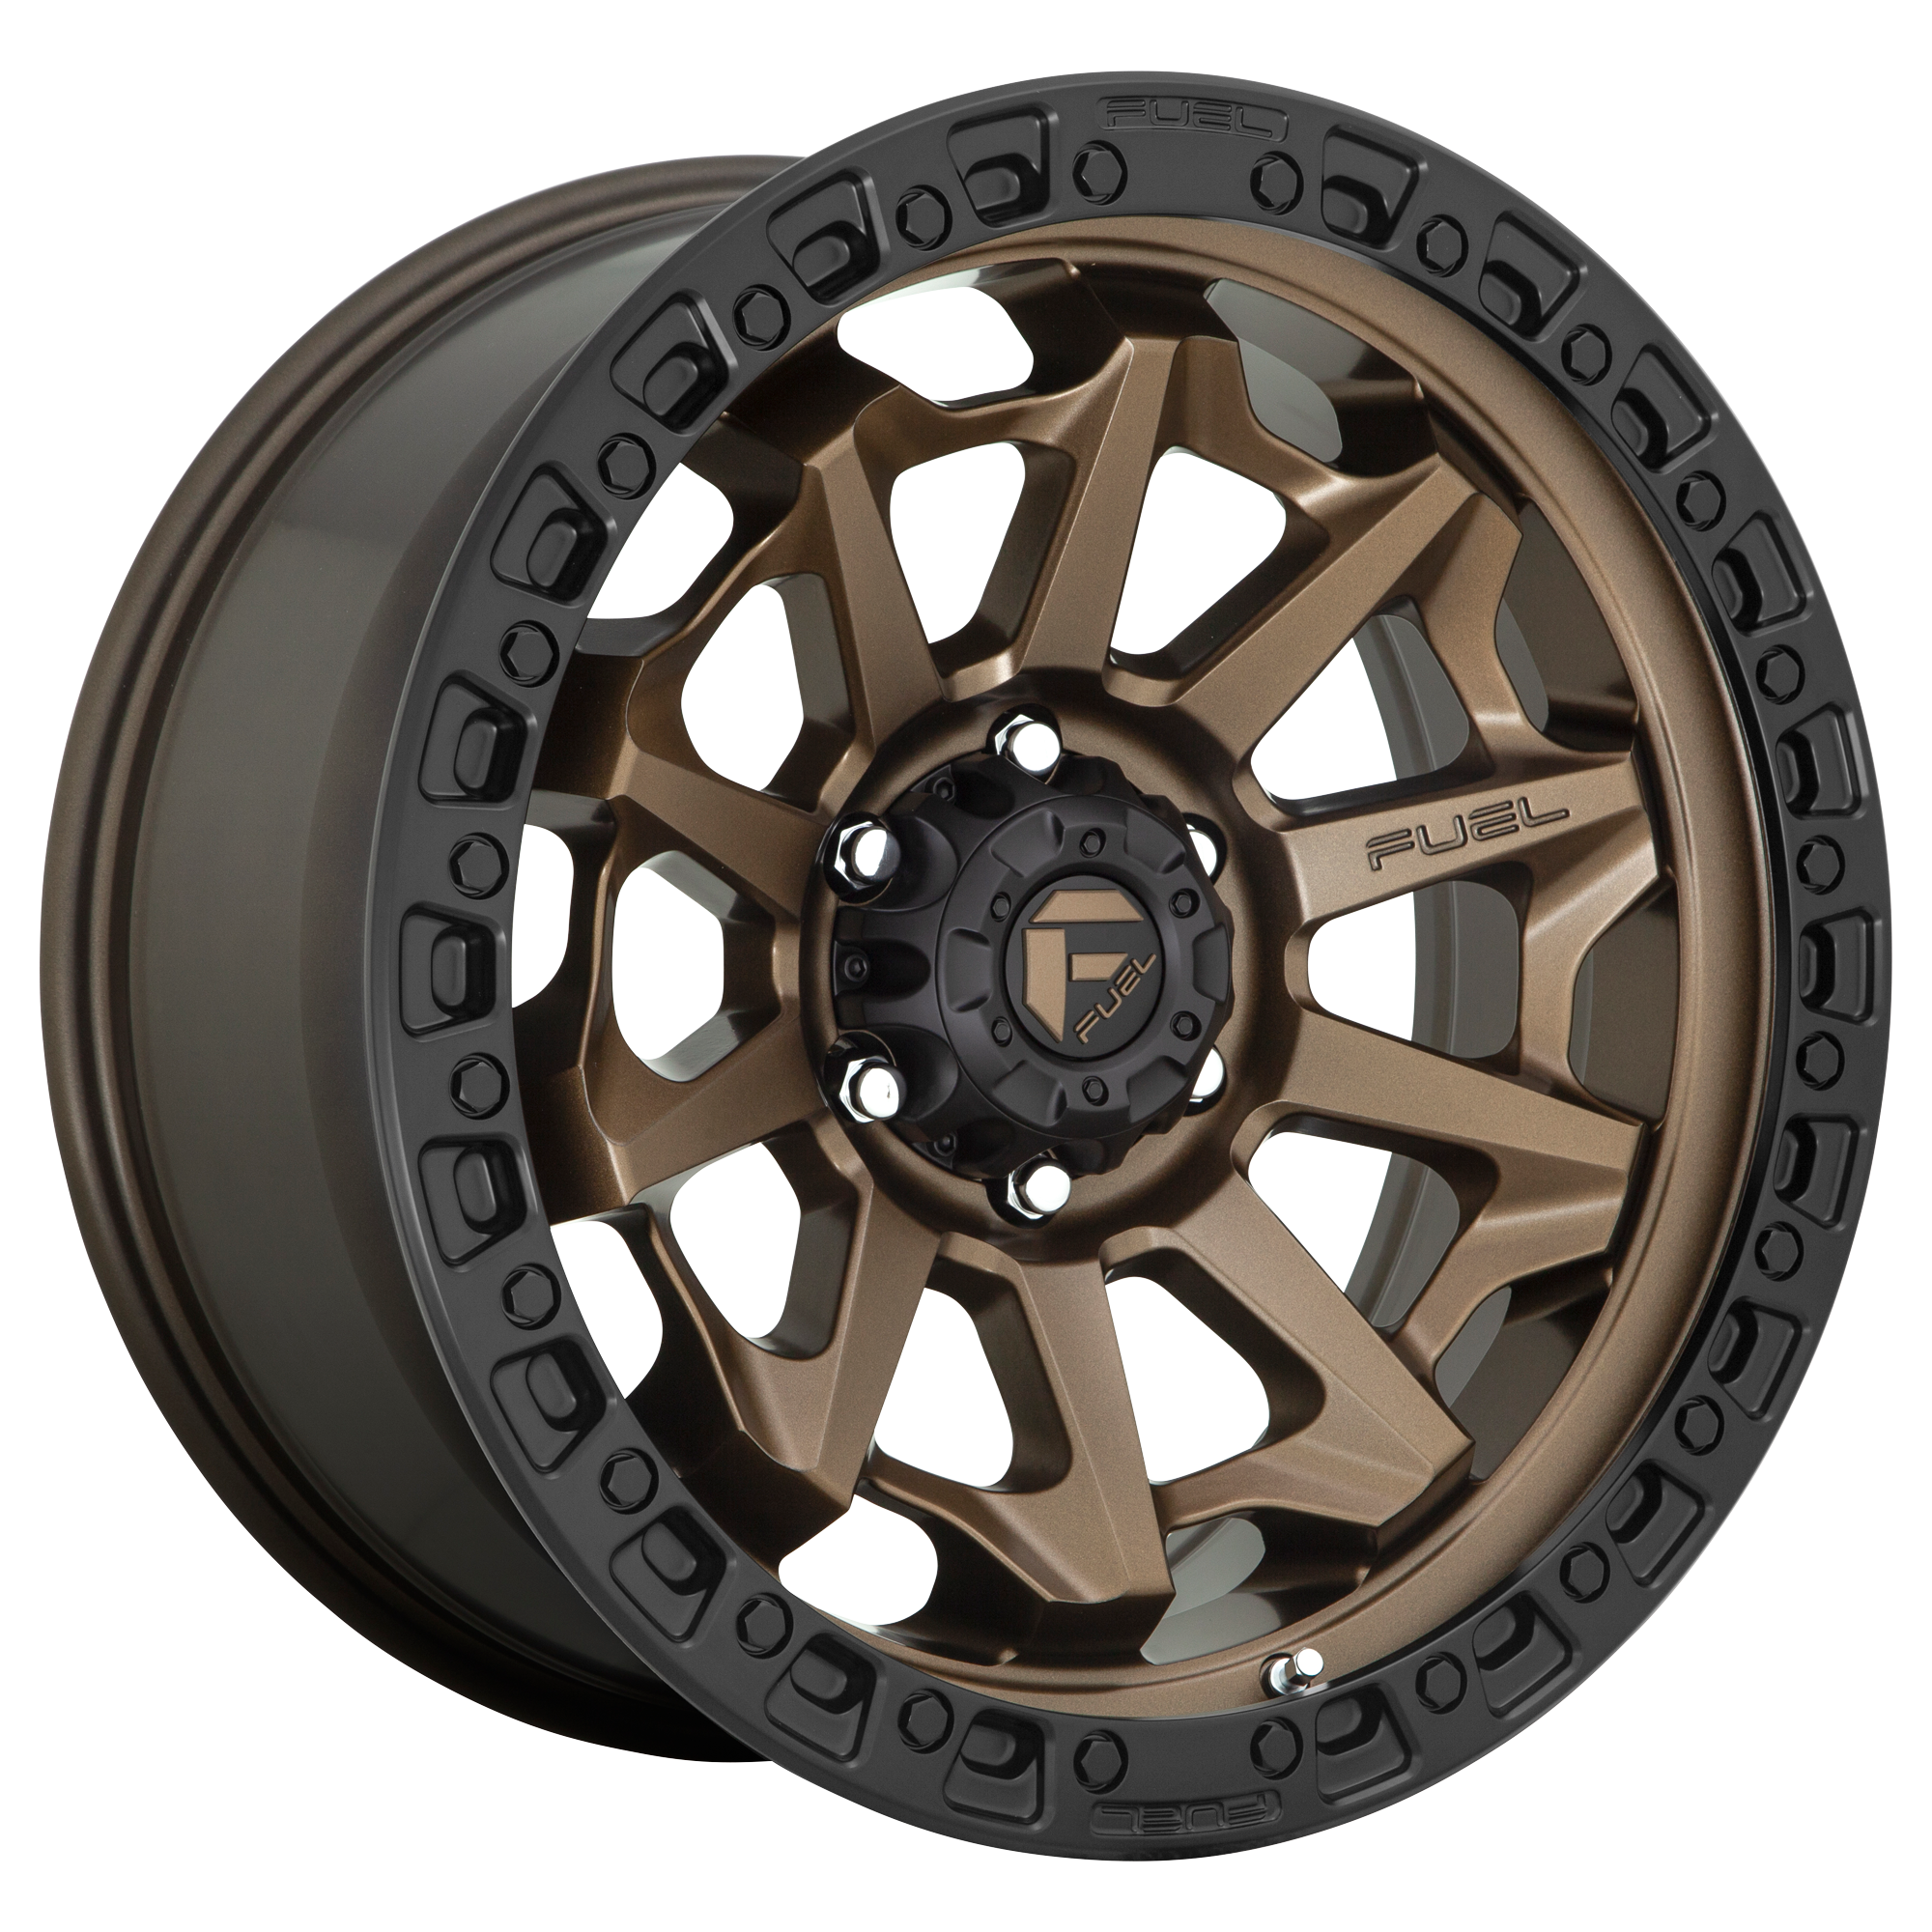 COVERT 20x9 8x170.00 MATTE BRONZE BLACK BEAD RING (20 mm) - Tires and Engine Performance